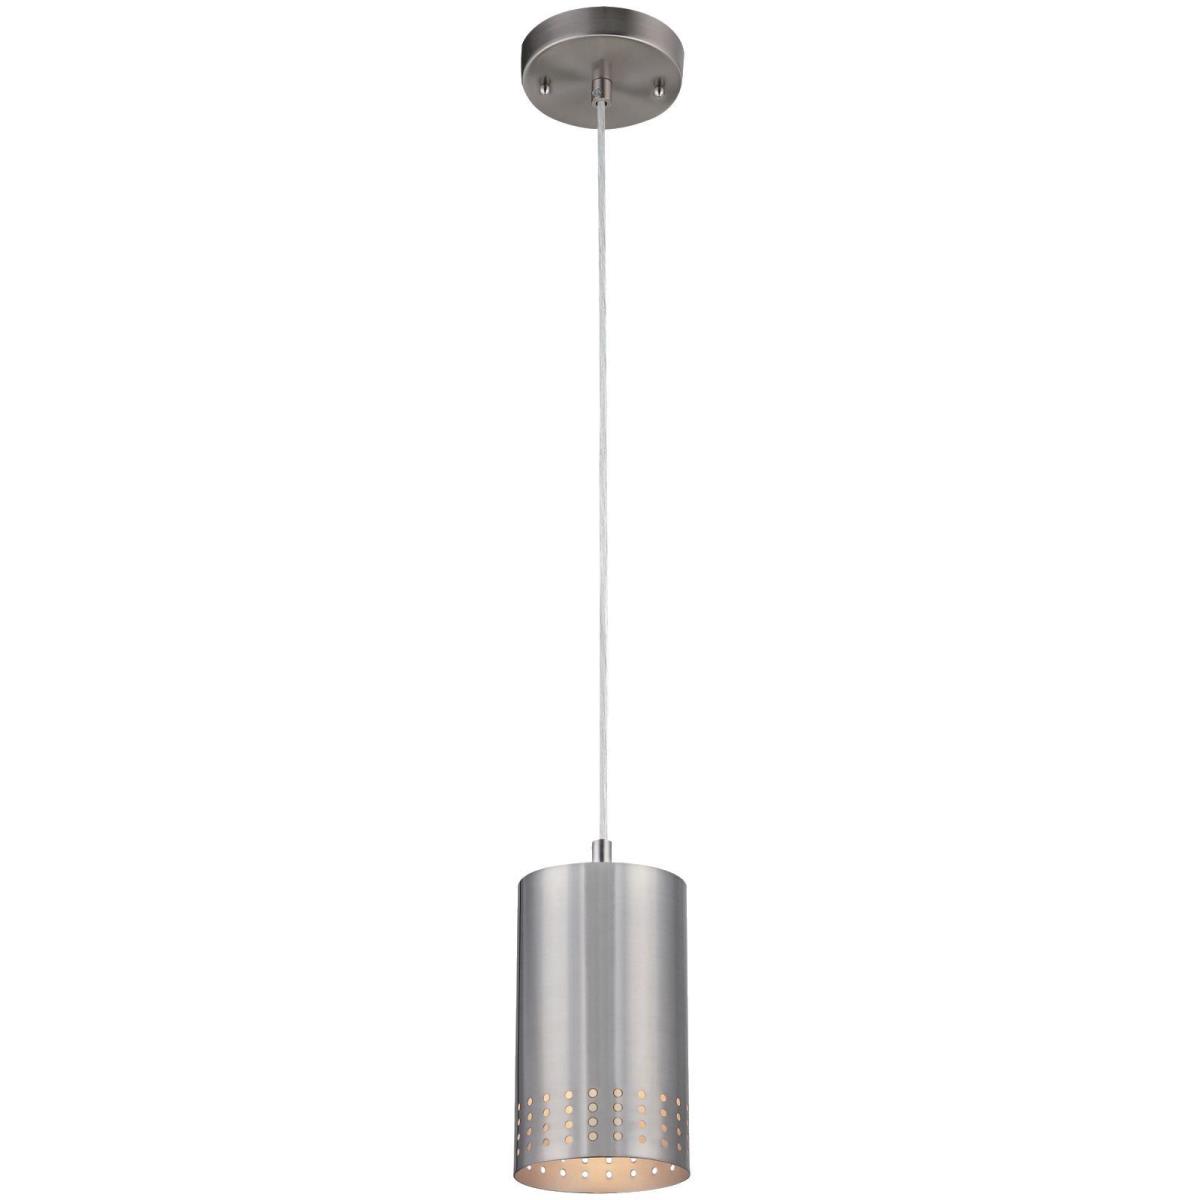 1 Light Mini Pendant Brushed Nickel Finish with Perforated Metal Shade